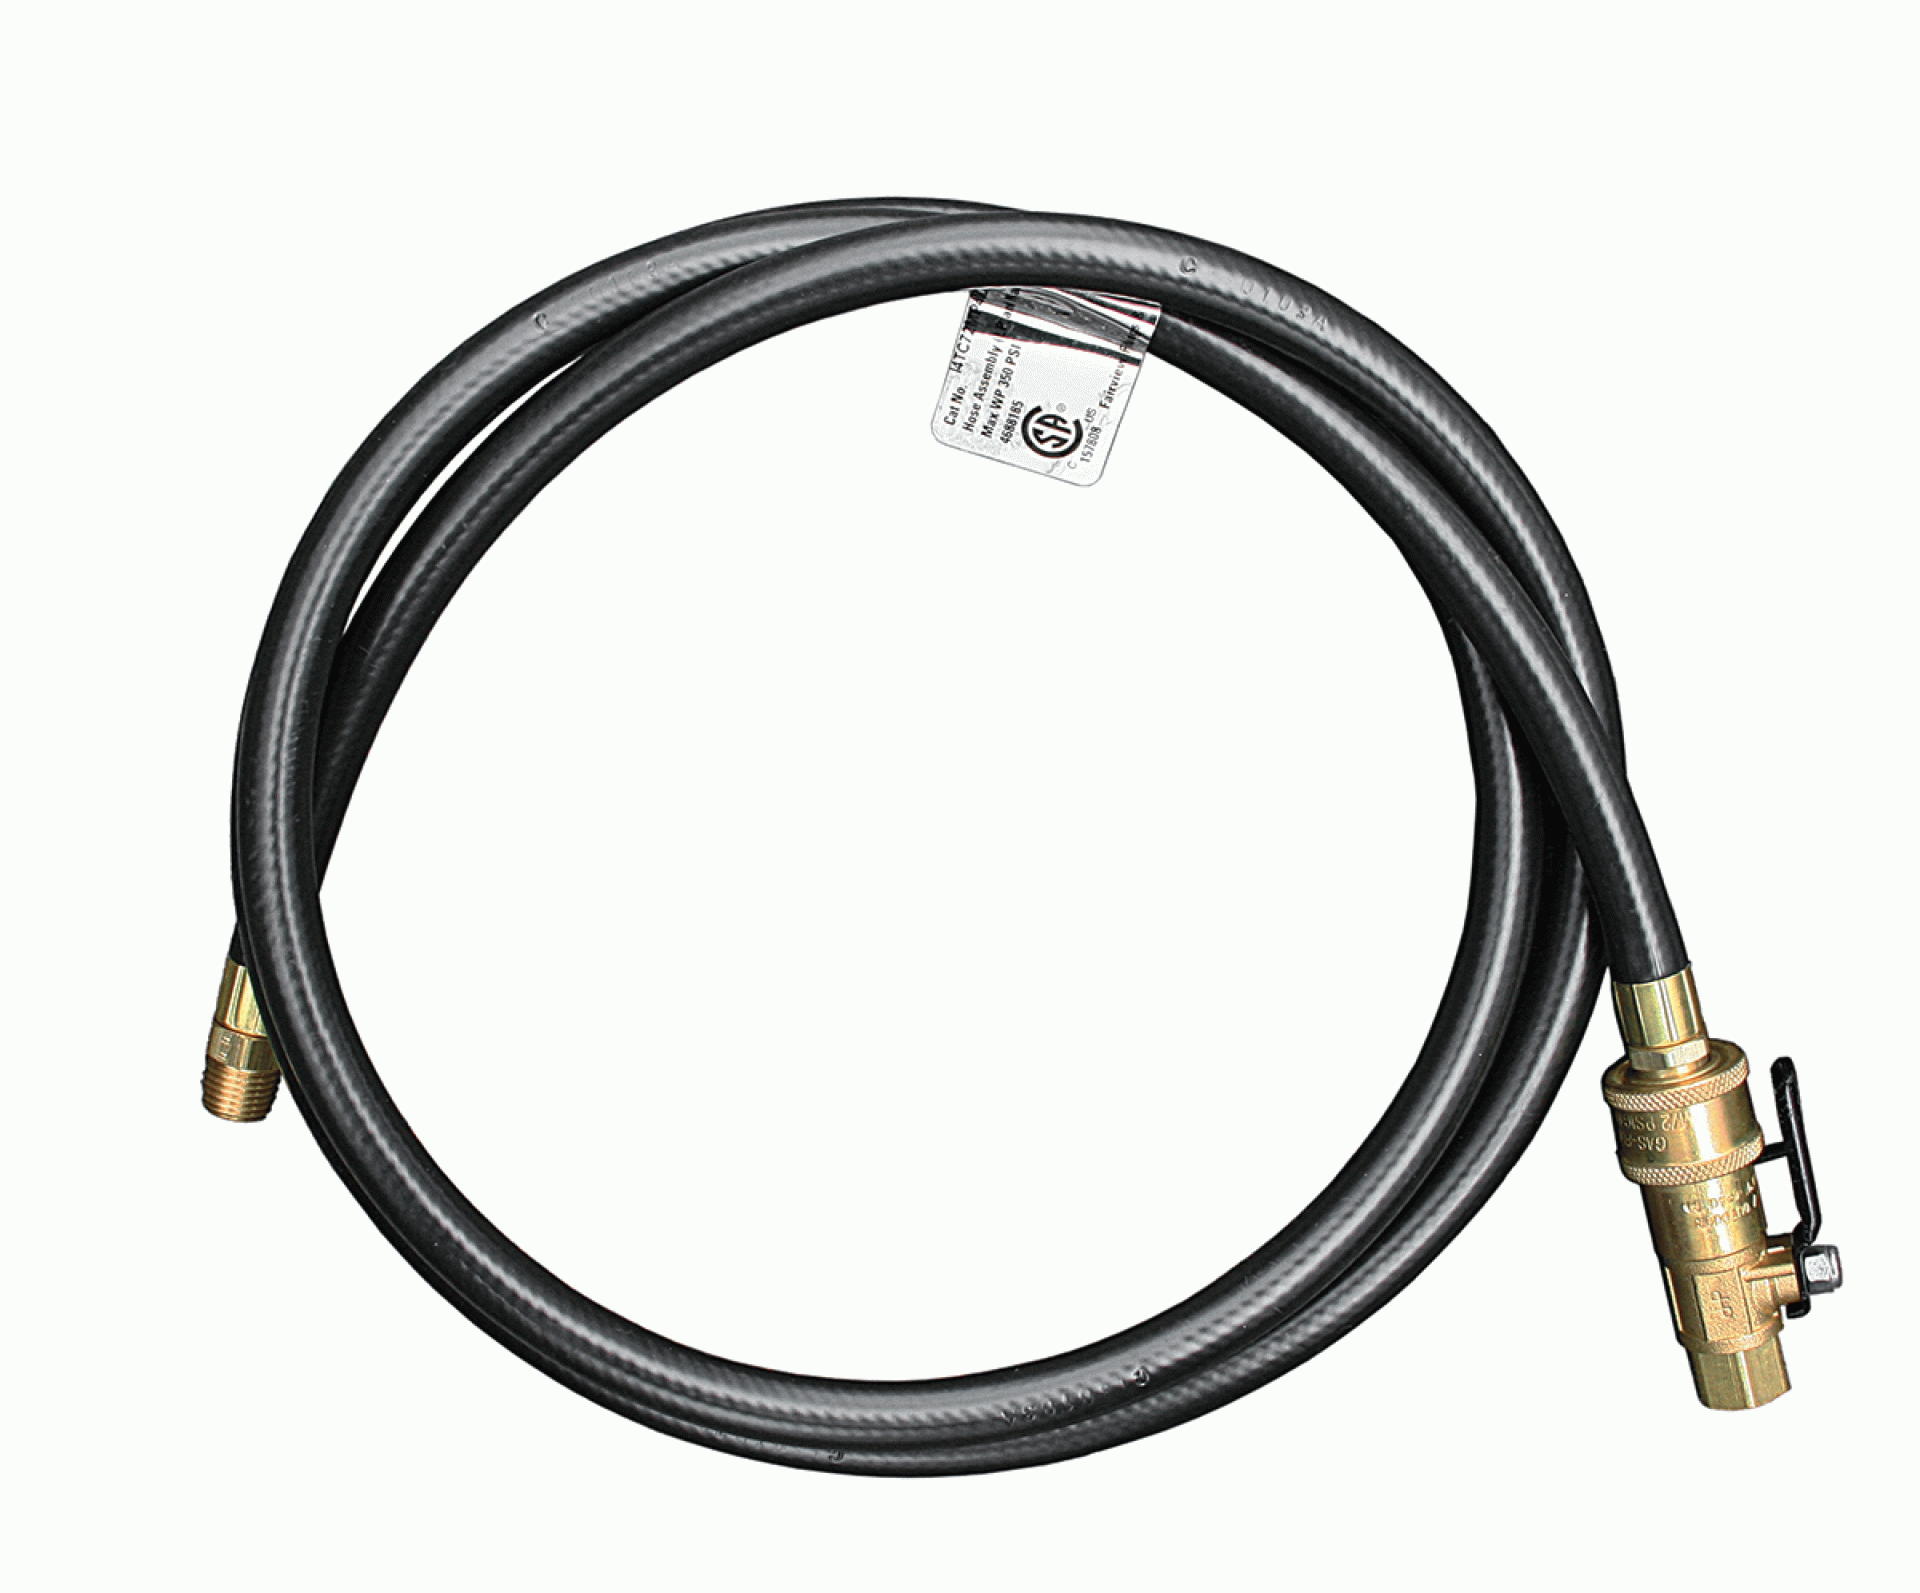 MARSHALL EXCELSIOR COMPANY | MER14TCQD-72 | HOSE HIGH PRESSURE QUICK DISCONNECT 1/4" X 1/4" MNPT W/CAP 72"